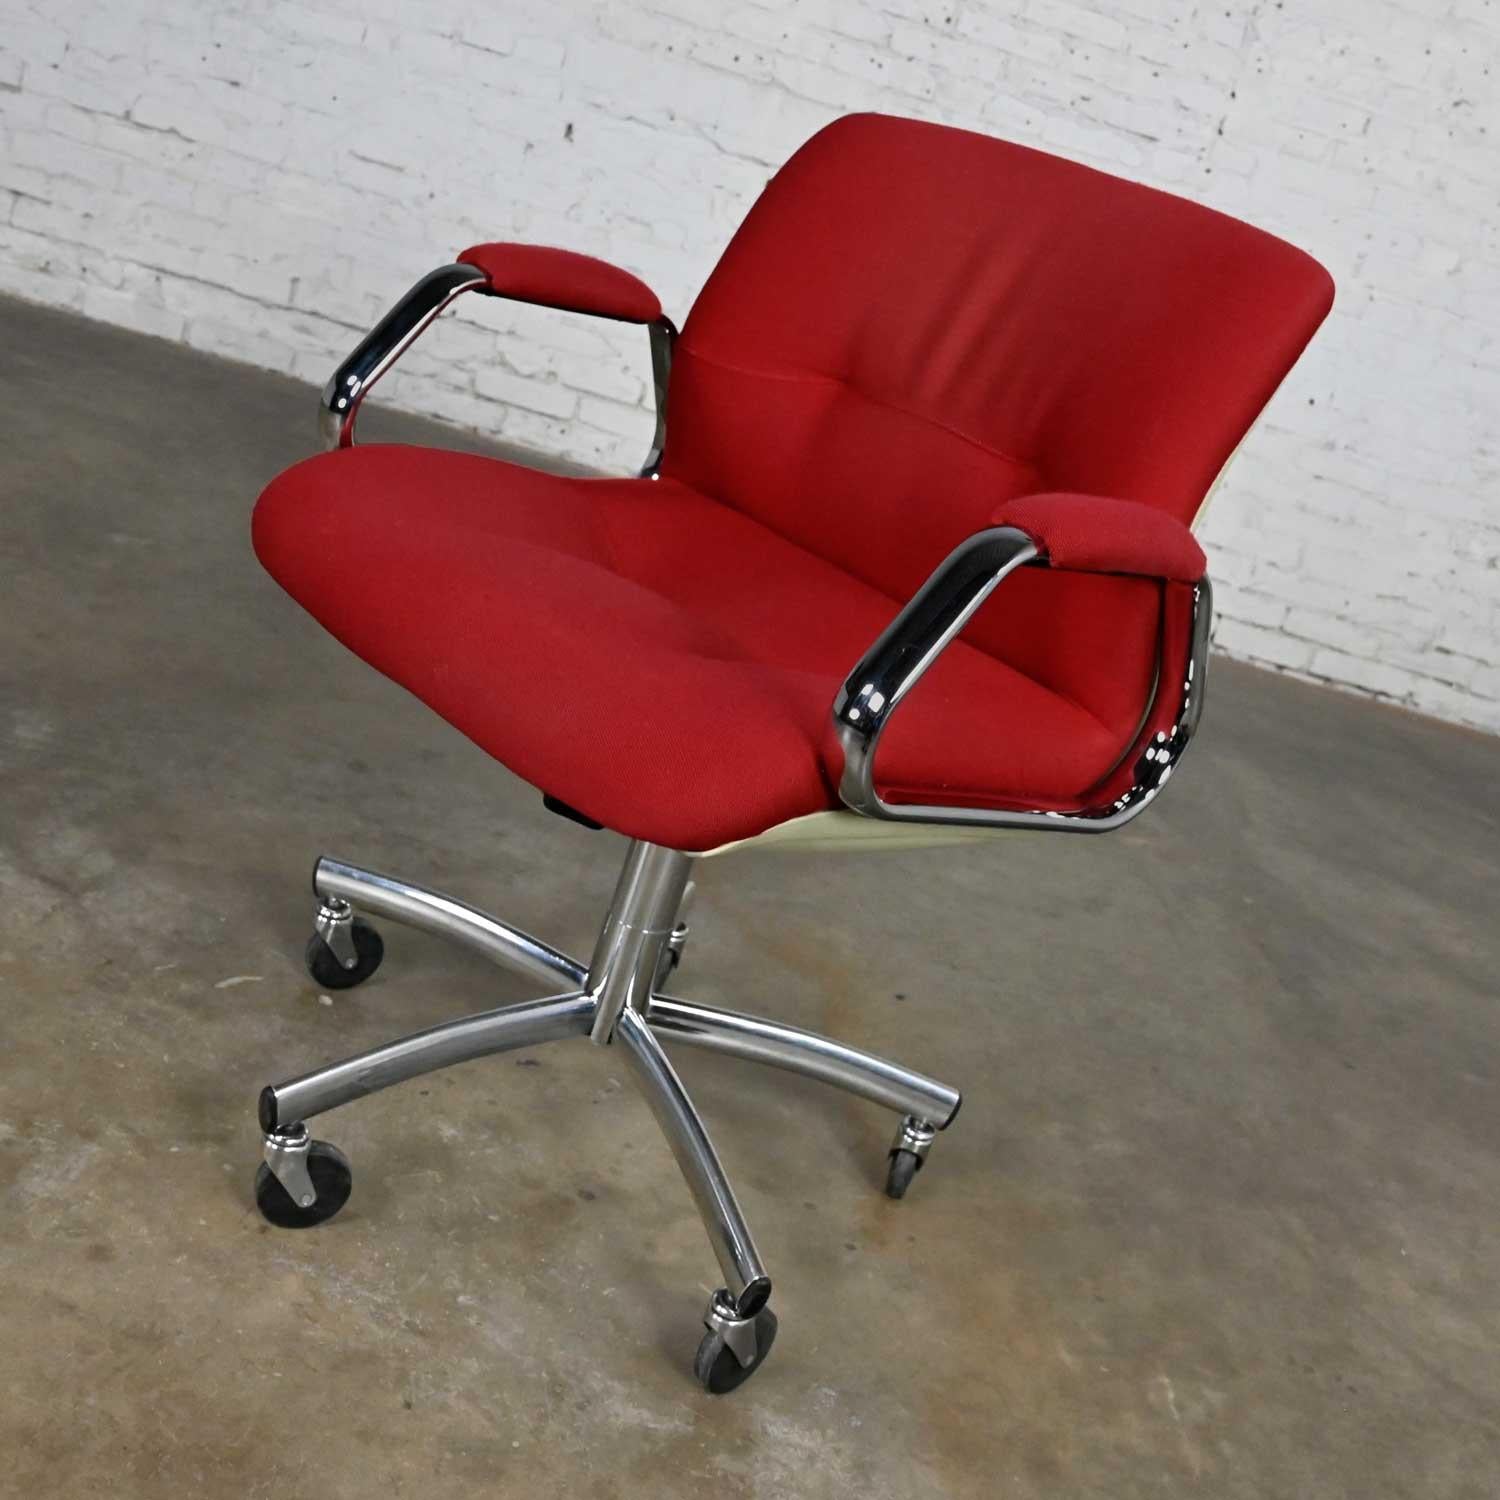 who invented the swivel chair